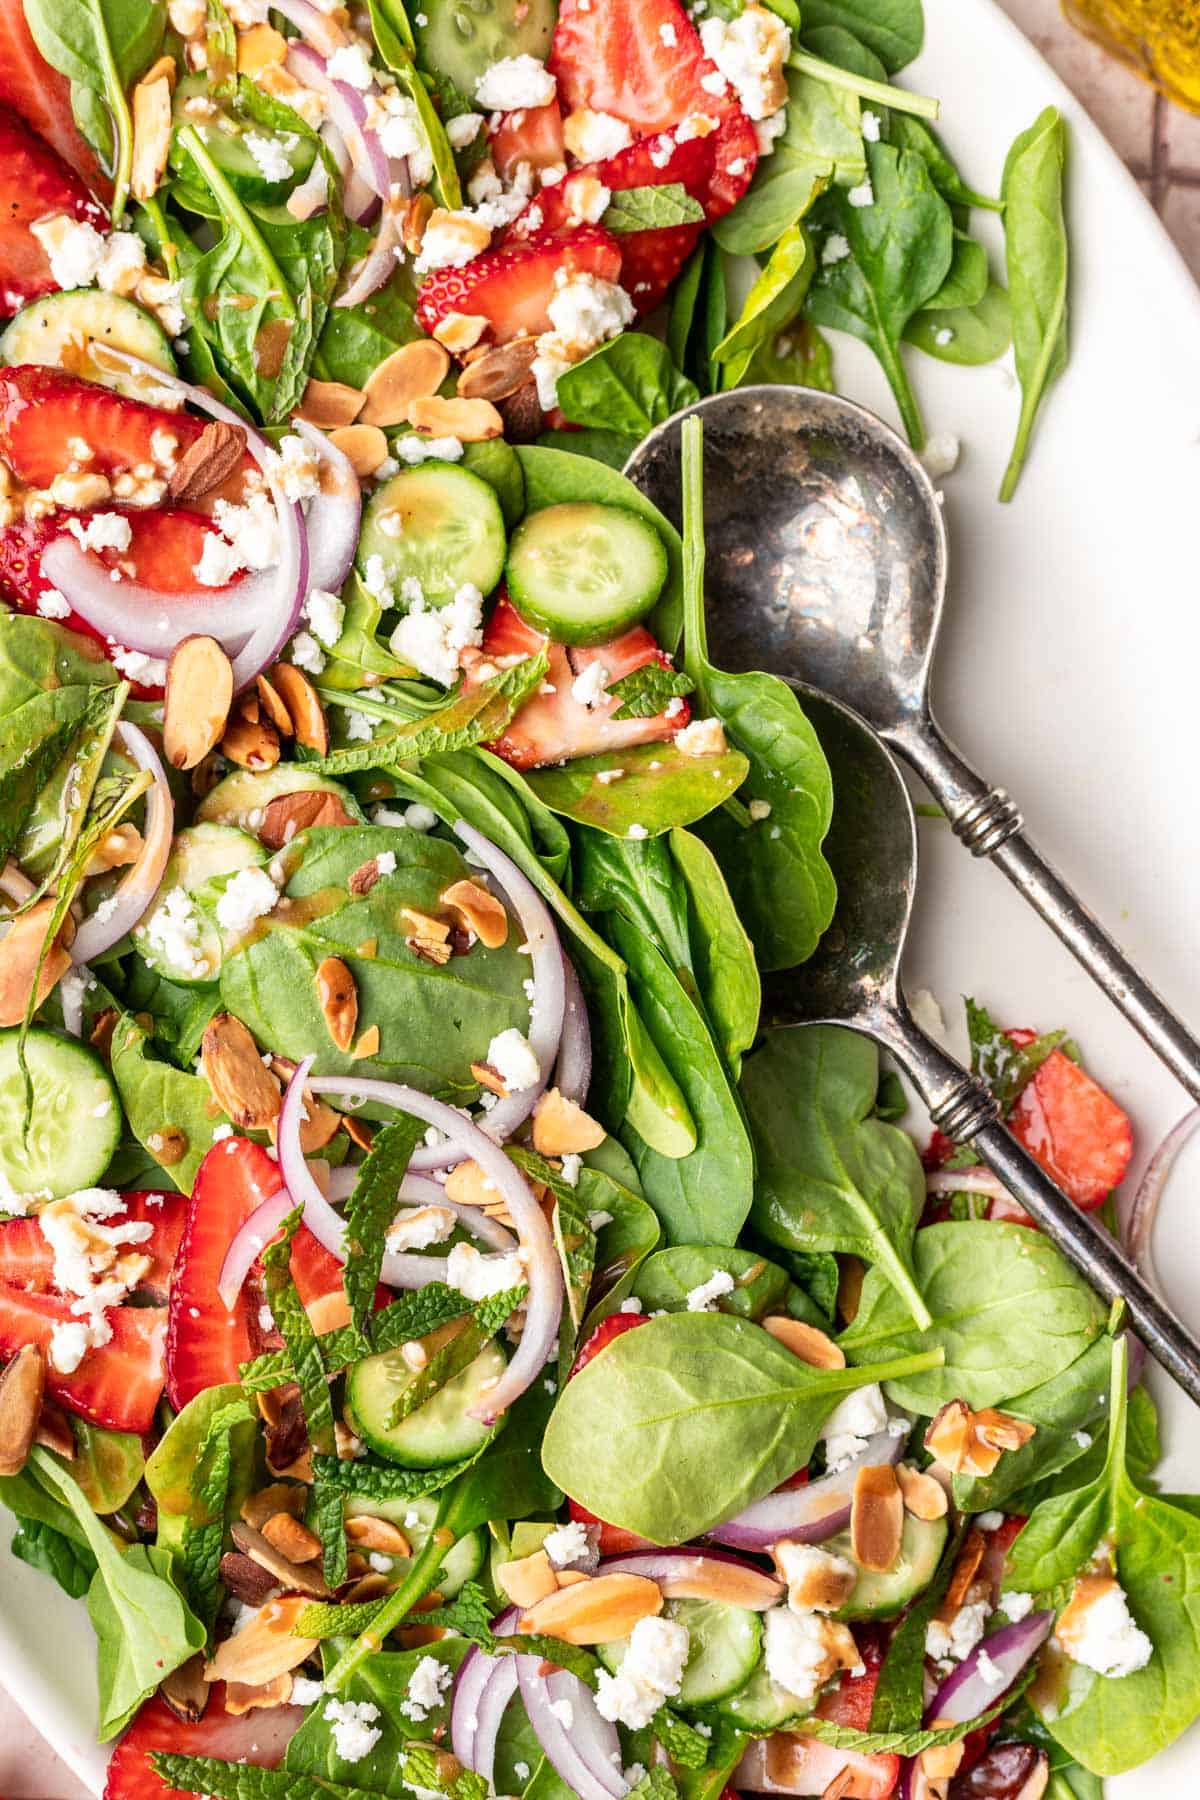 Maple balsamic dressing drizzled on a strawberry spinach salad.